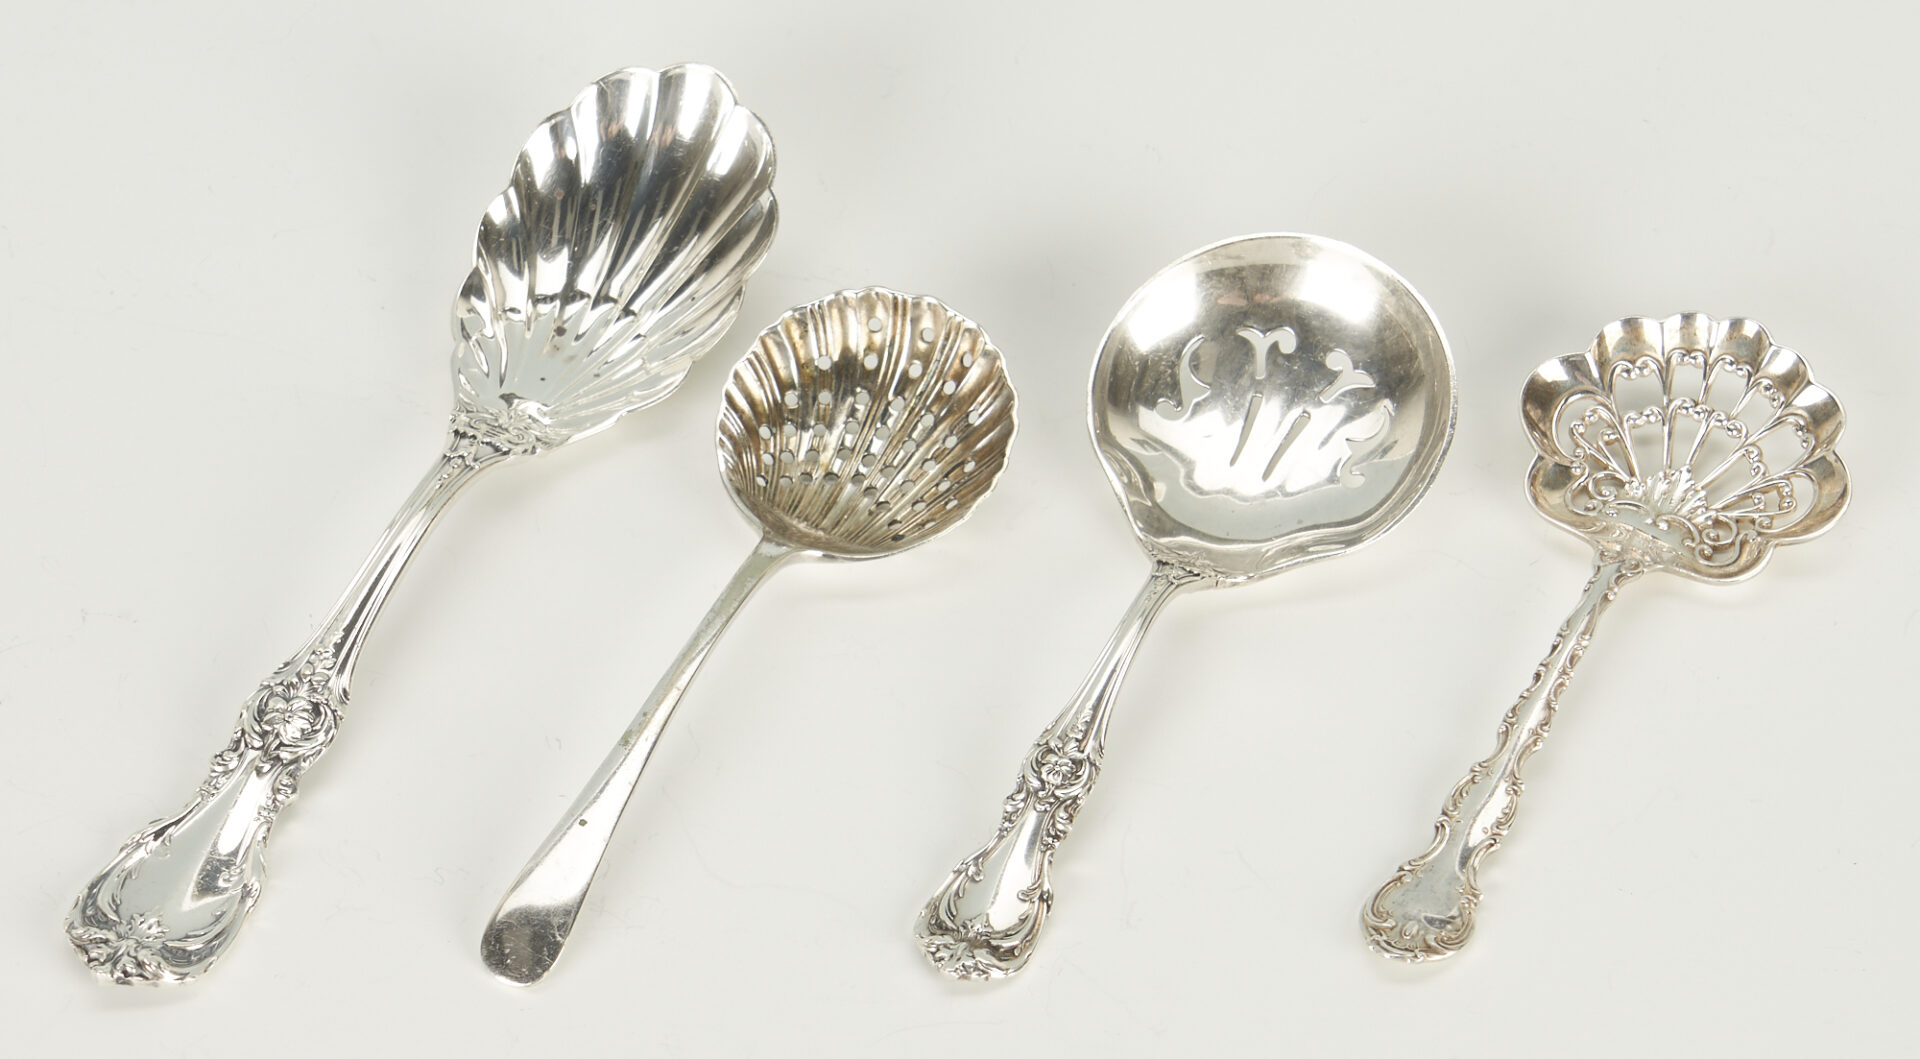 Lot 440: 47 Assorted Sterling Items incl. Burgundy Flatware, Christmas Ornaments